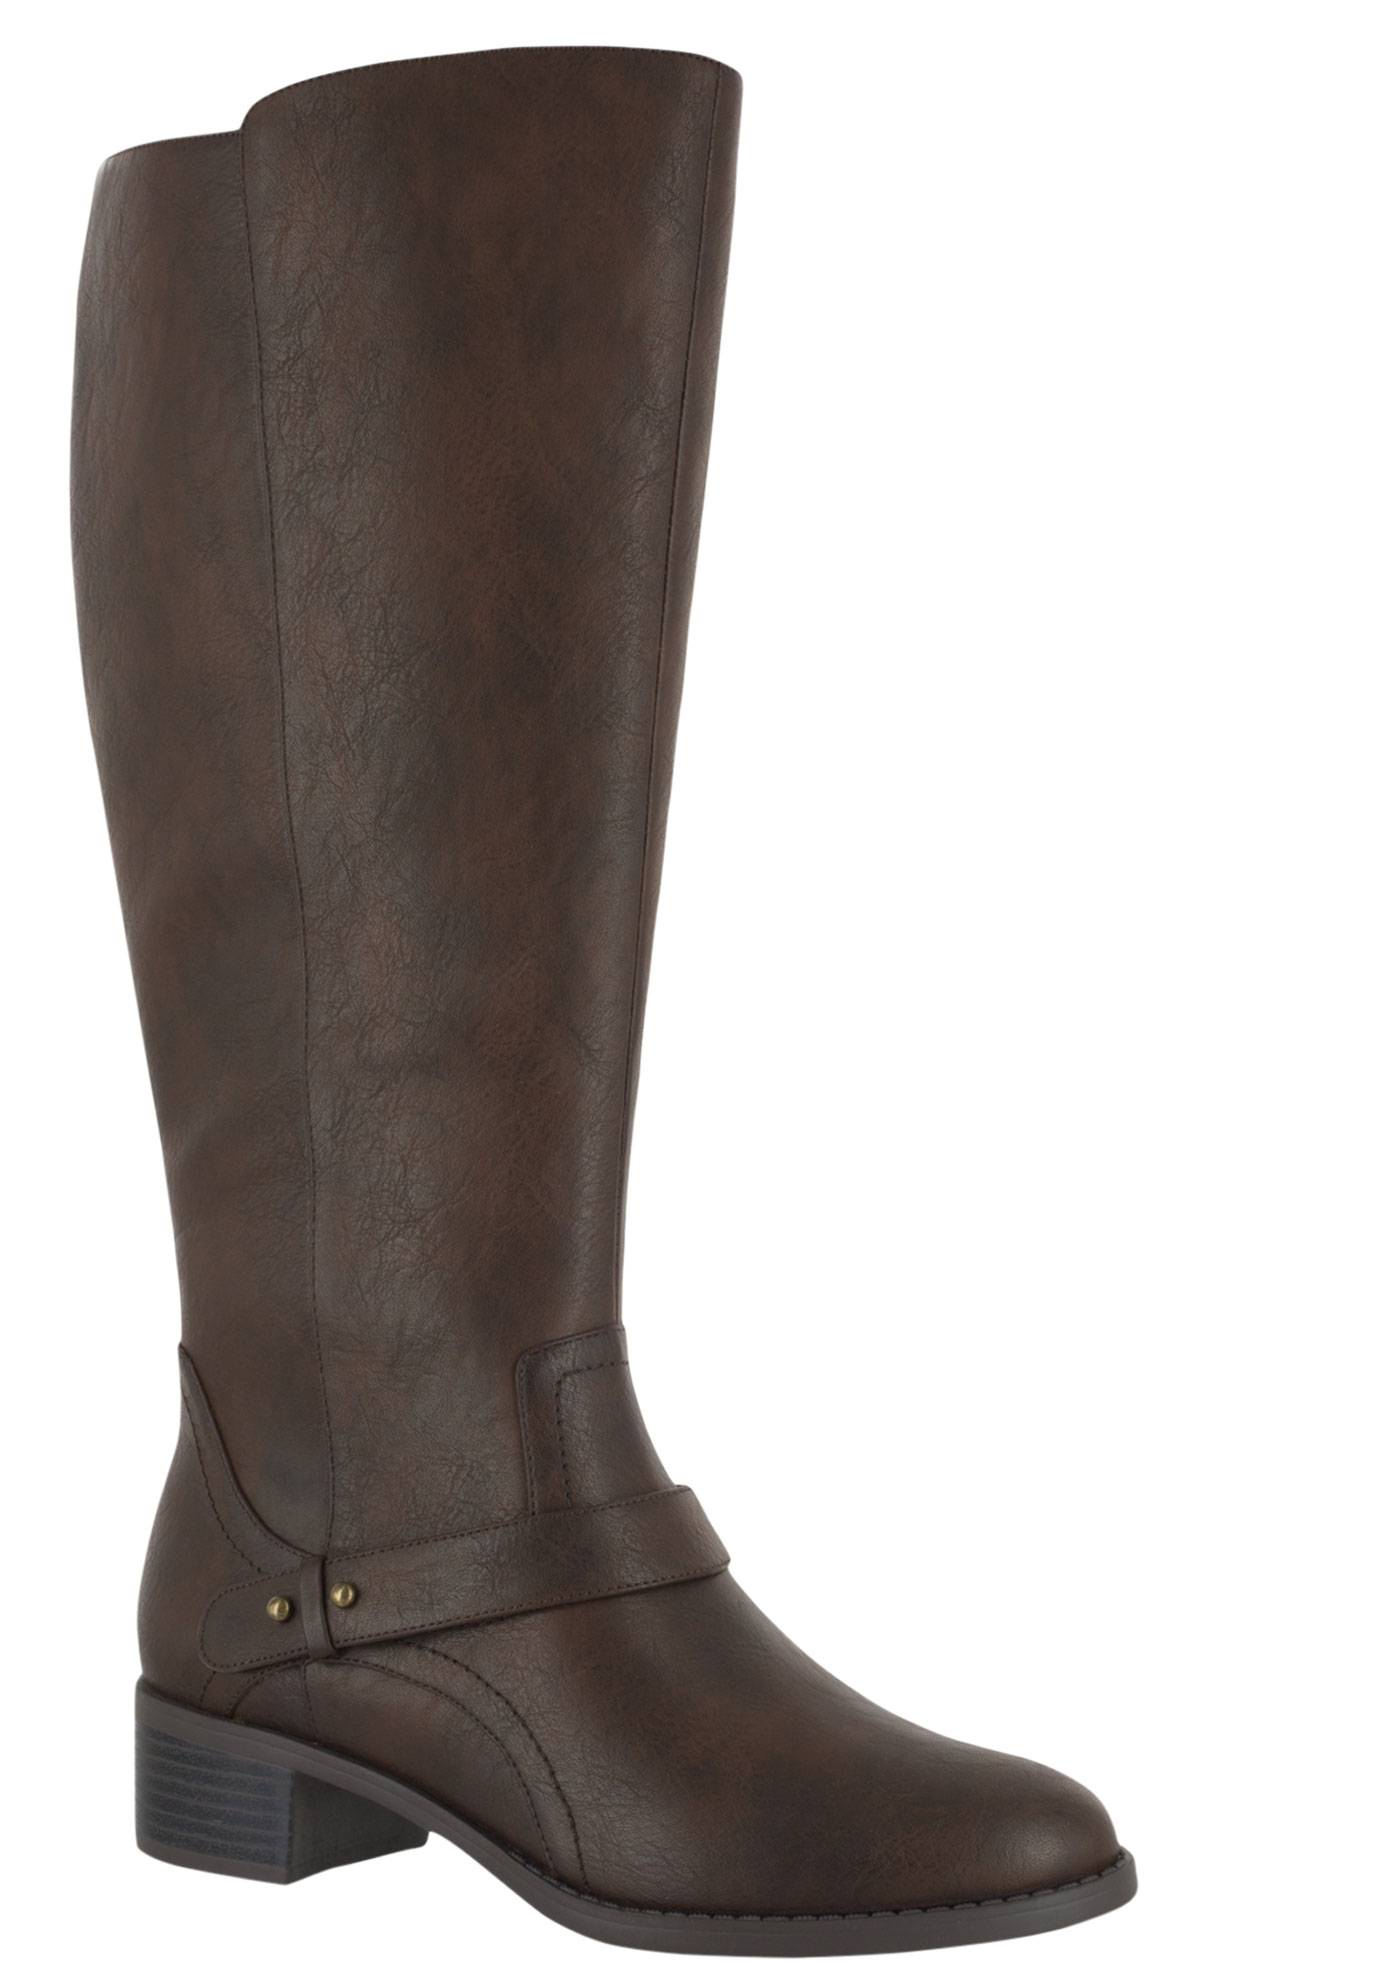 Jewel Plus Wide Calf Boots by Easy 